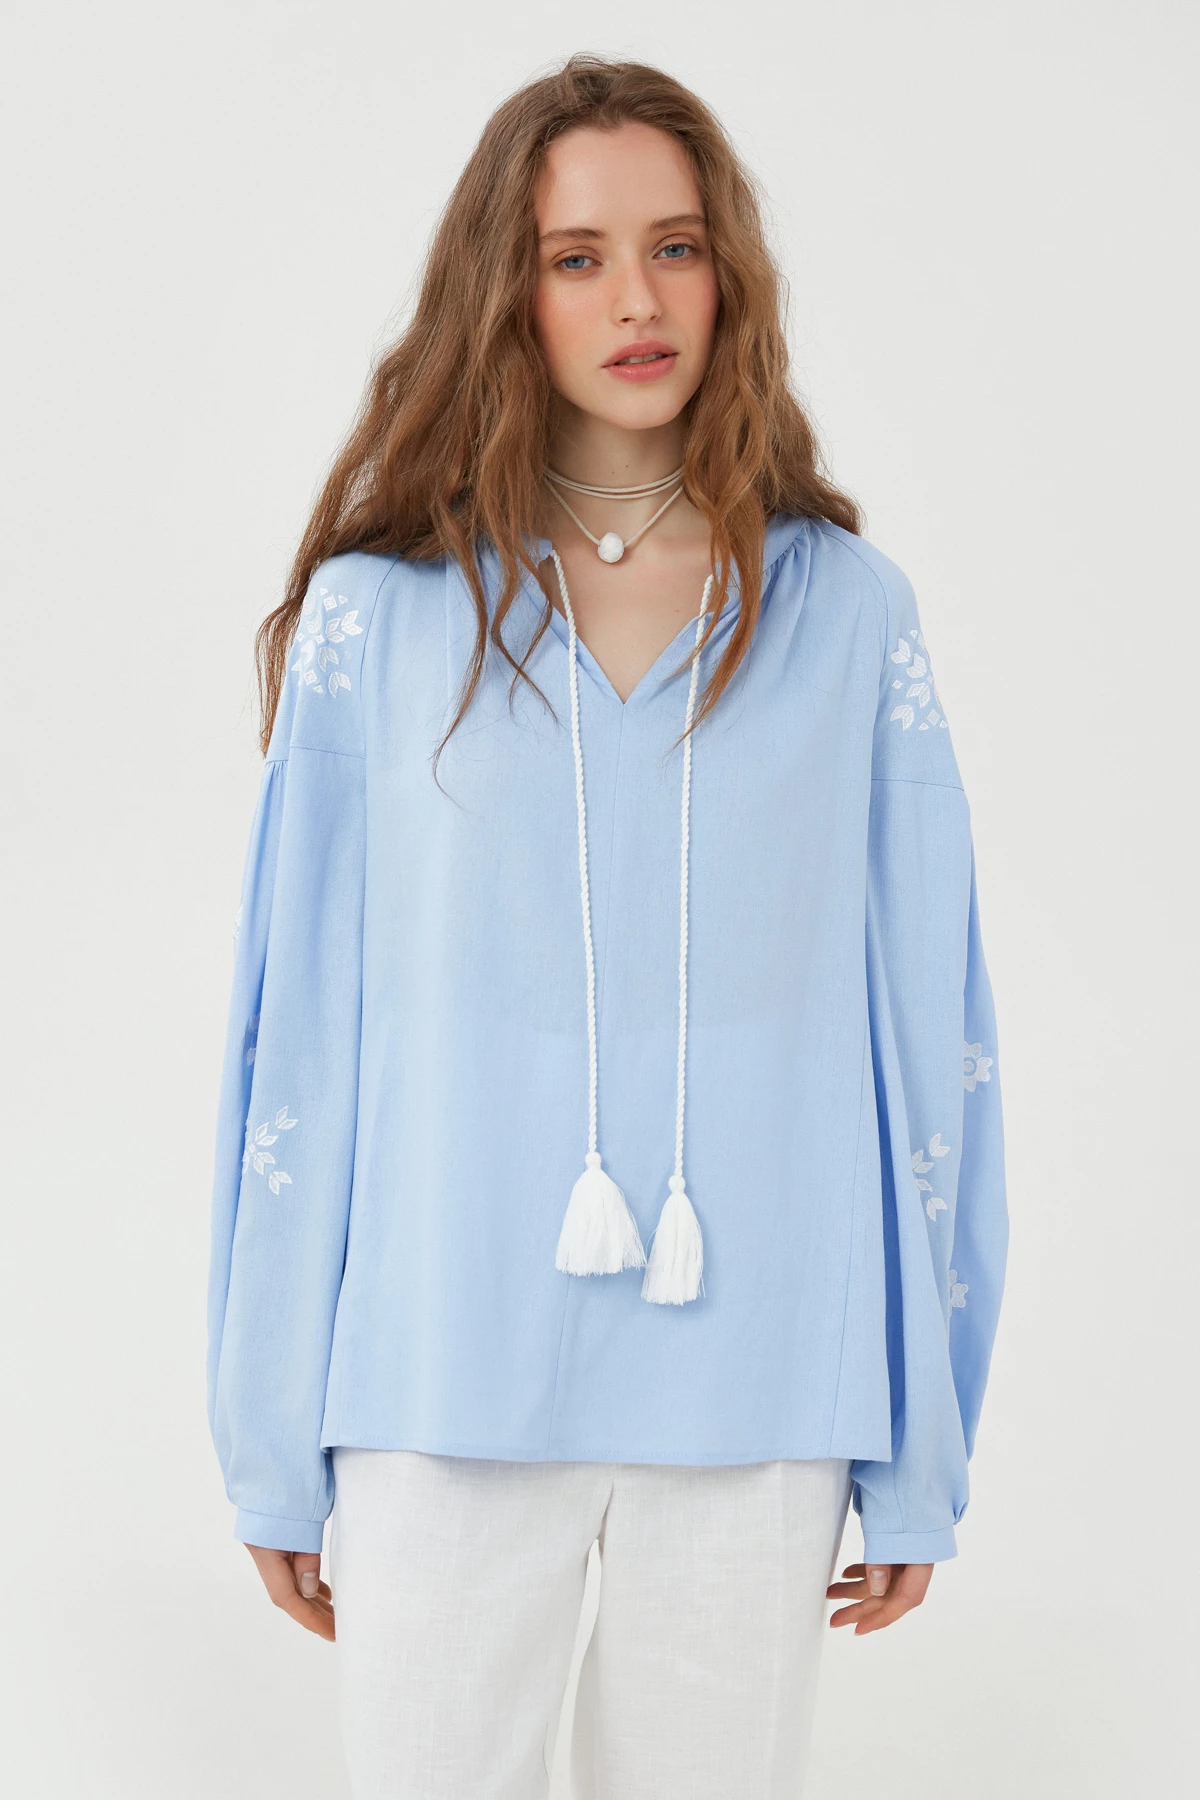 Embroidered shirt "Malvy" with blue linen, photo 2